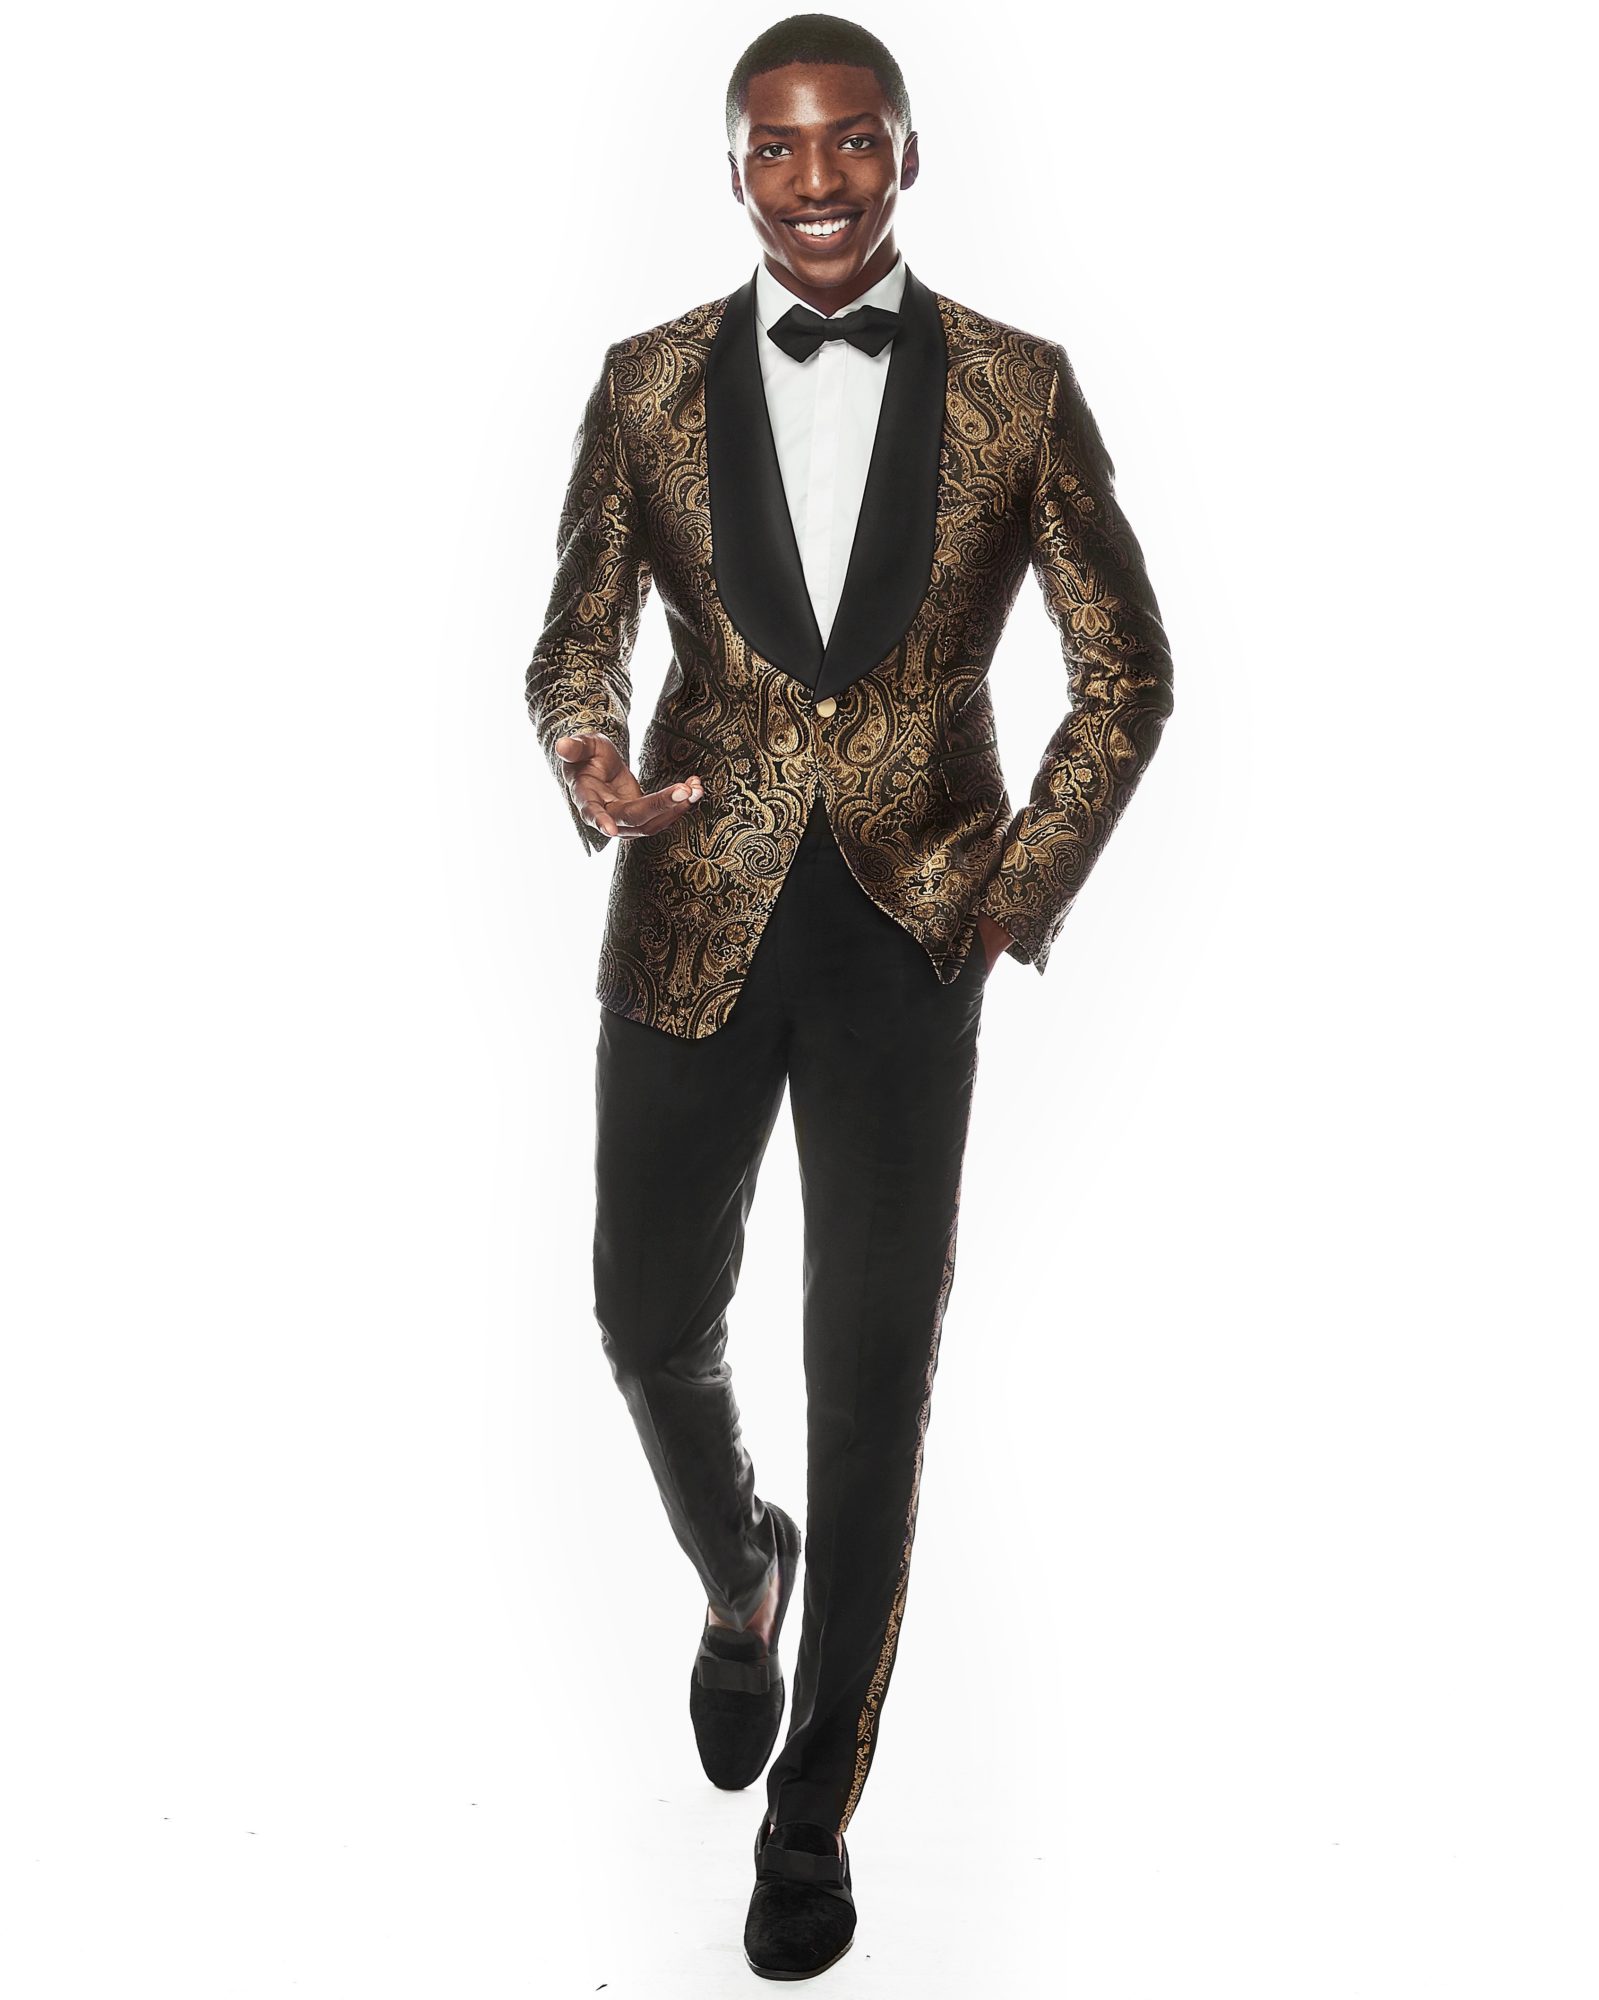 Grooms-to-be, Get Dapper Ready in These Suits by T.I Nathan